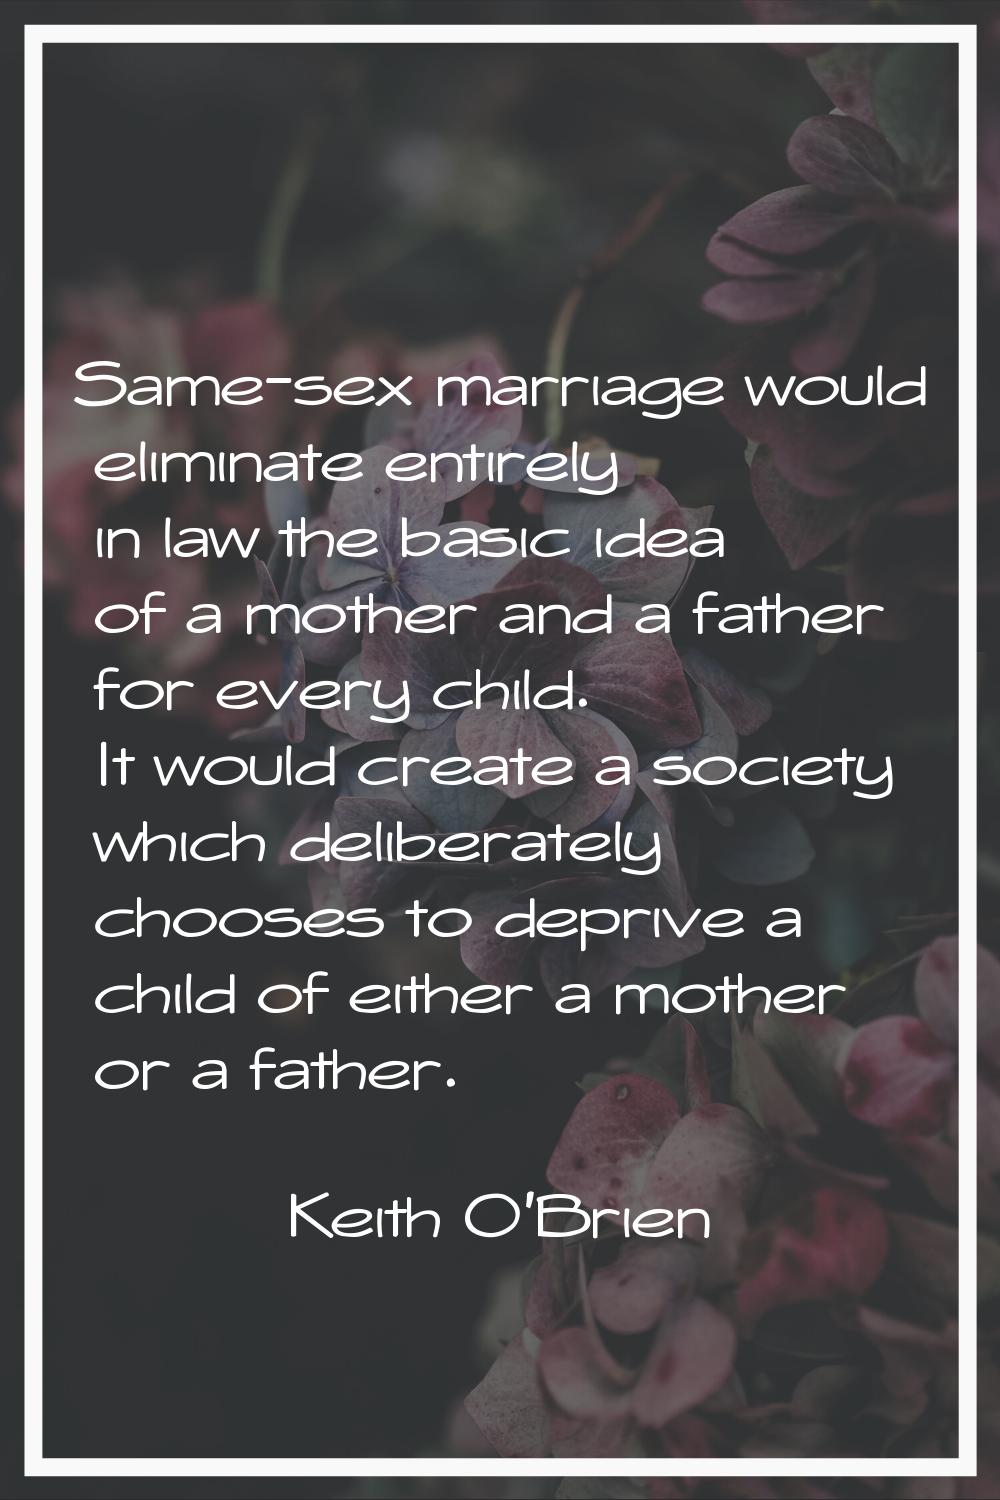 Same-sex marriage would eliminate entirely in law the basic idea of a mother and a father for every